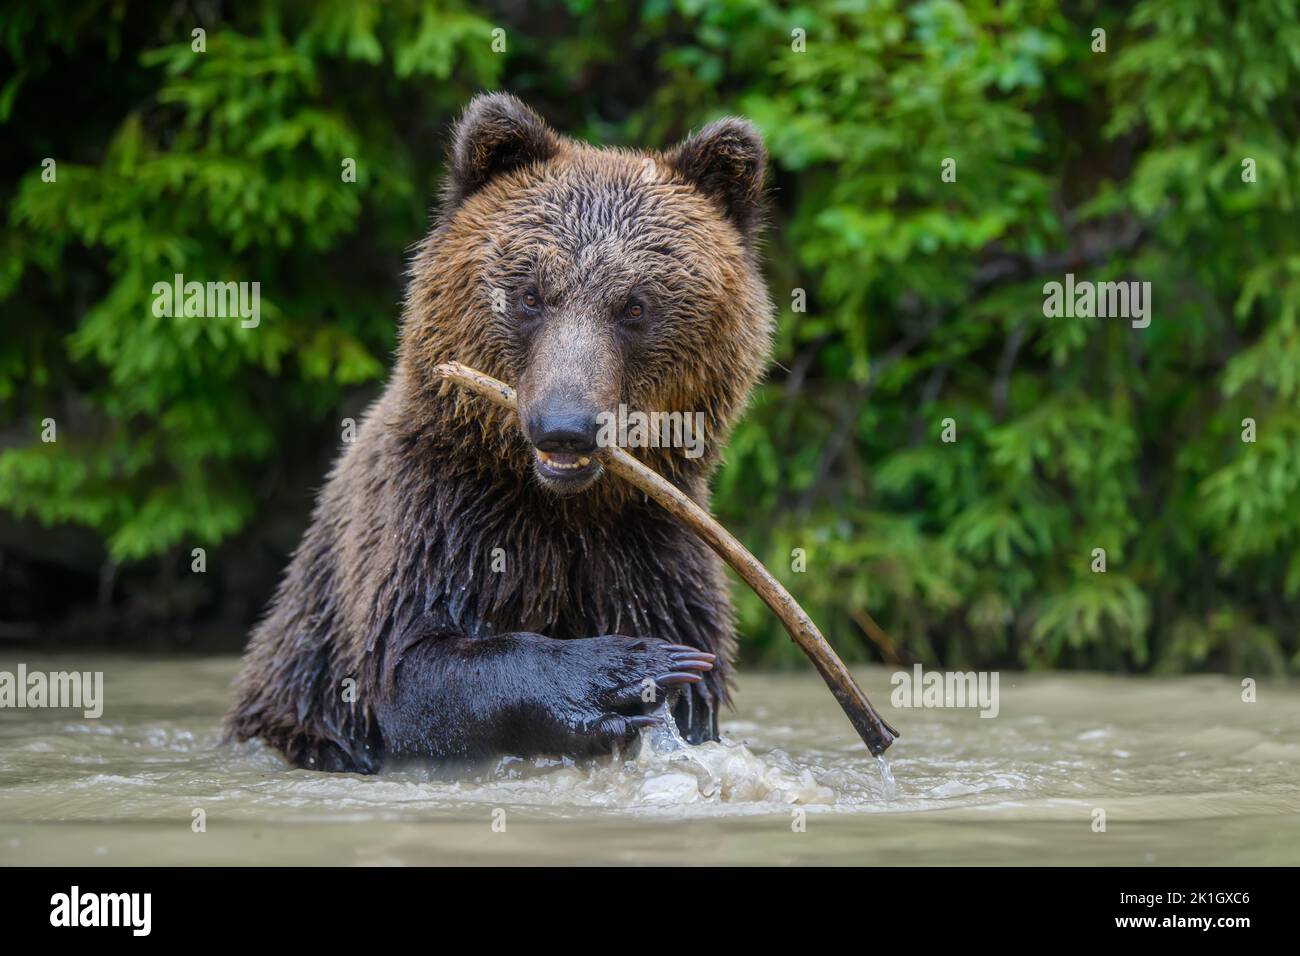 Wild Brown Bear (Ursus Arctos) on playing pond in the forest. Animal in natural habitat. Wildlife scene Stock Photo